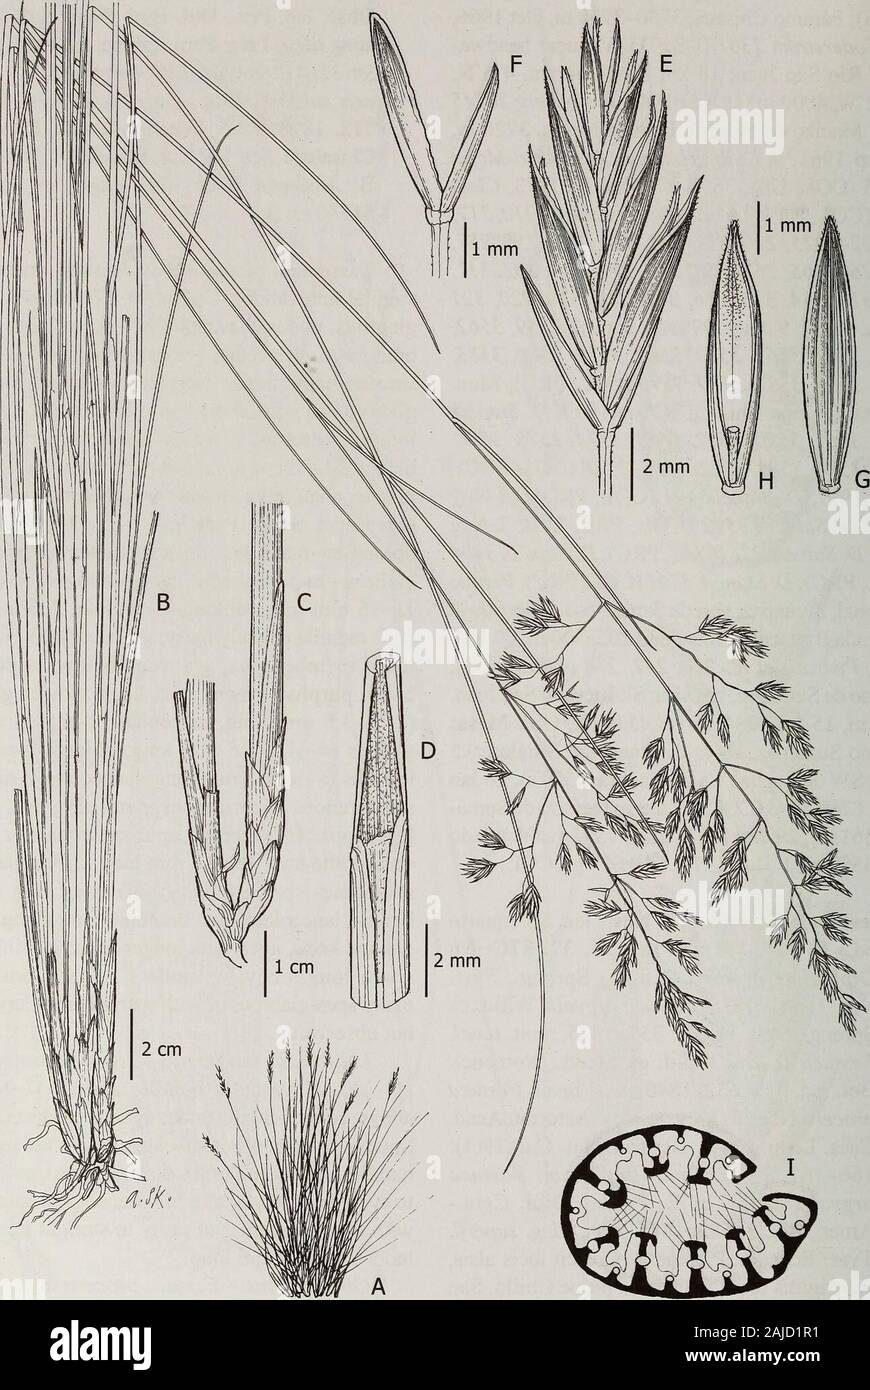 Contributions from the United States National Herbarium . awned, the awn 0.3-0.8 mm long; callus glabroussometimes sparsely hairy; paleas as long as thelemma, lanceolate, membranous, hairy along upper1/4 and keels, apex with longer hairs; lodicules ca.1 mm long, obovate; anthers 2.8-3.5 mm long;ovary apex glabrous or with sparse hairs. Caryopsesnot observed. Leaf blade anatomy.—Cross-sections with(11-) 15-21 vascular bundles and (5—)7—11 ribsabove; sclerenchyma under abaxial epidermis con-tinuous or discontinuous extending to all vascularbundle; adaxial epidermis discontinuous, extendingto eve Stock Photo